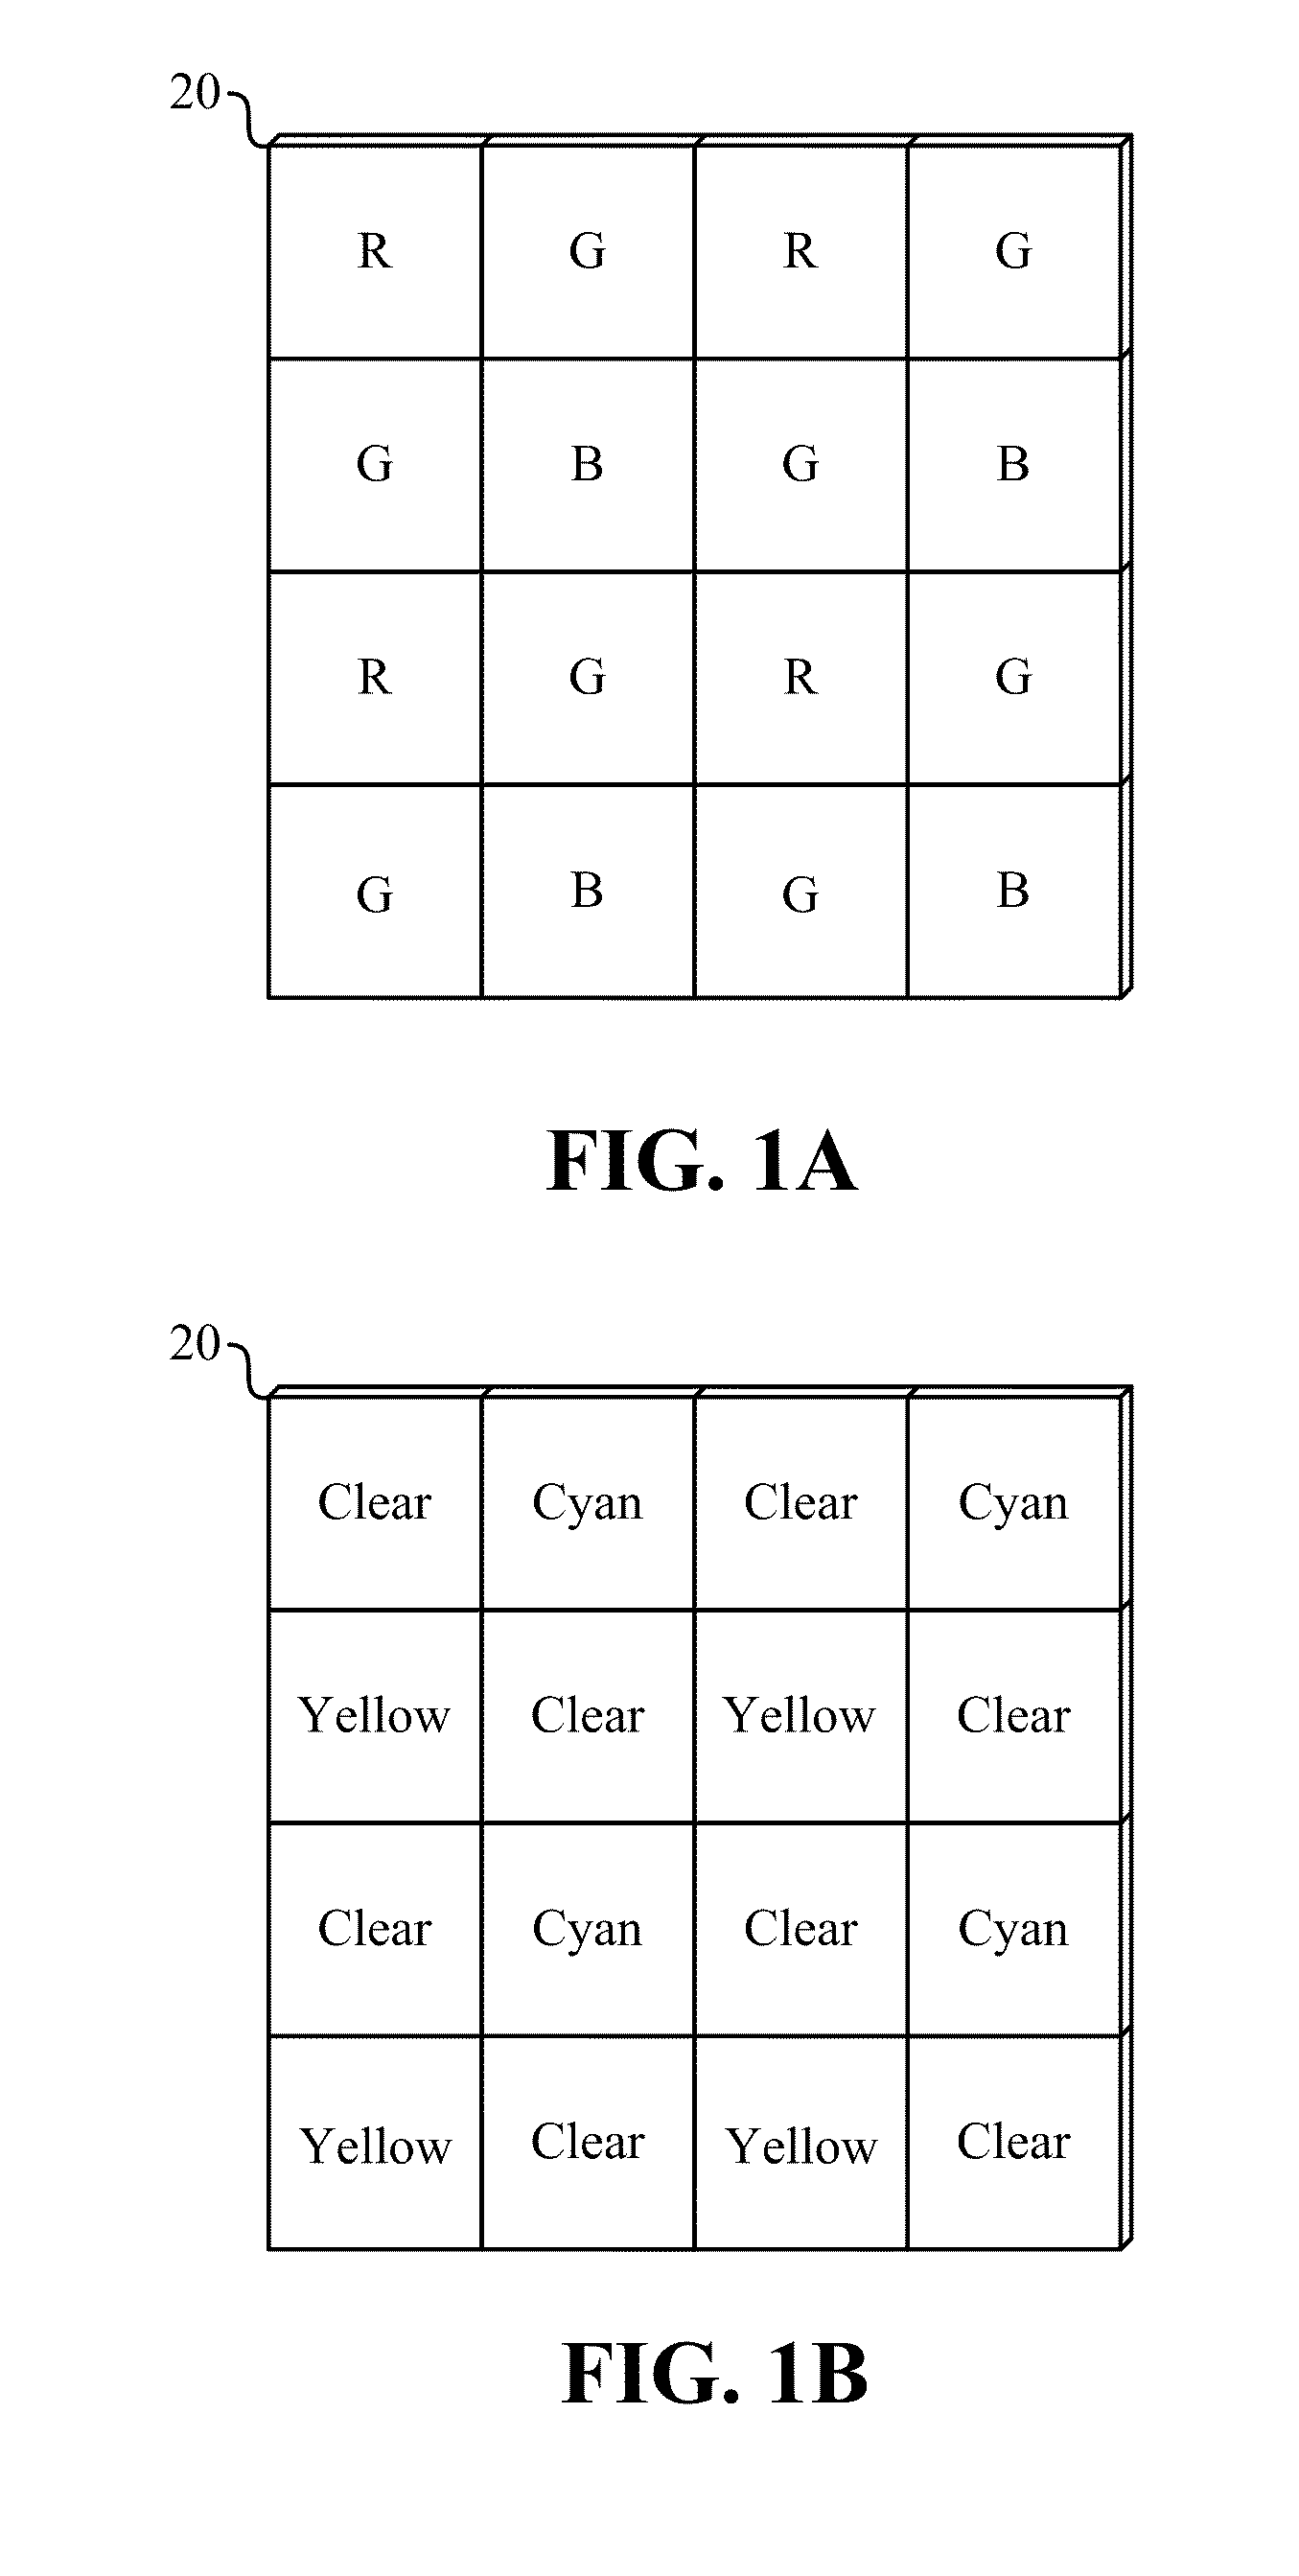 Image Sensing Device and Processing System